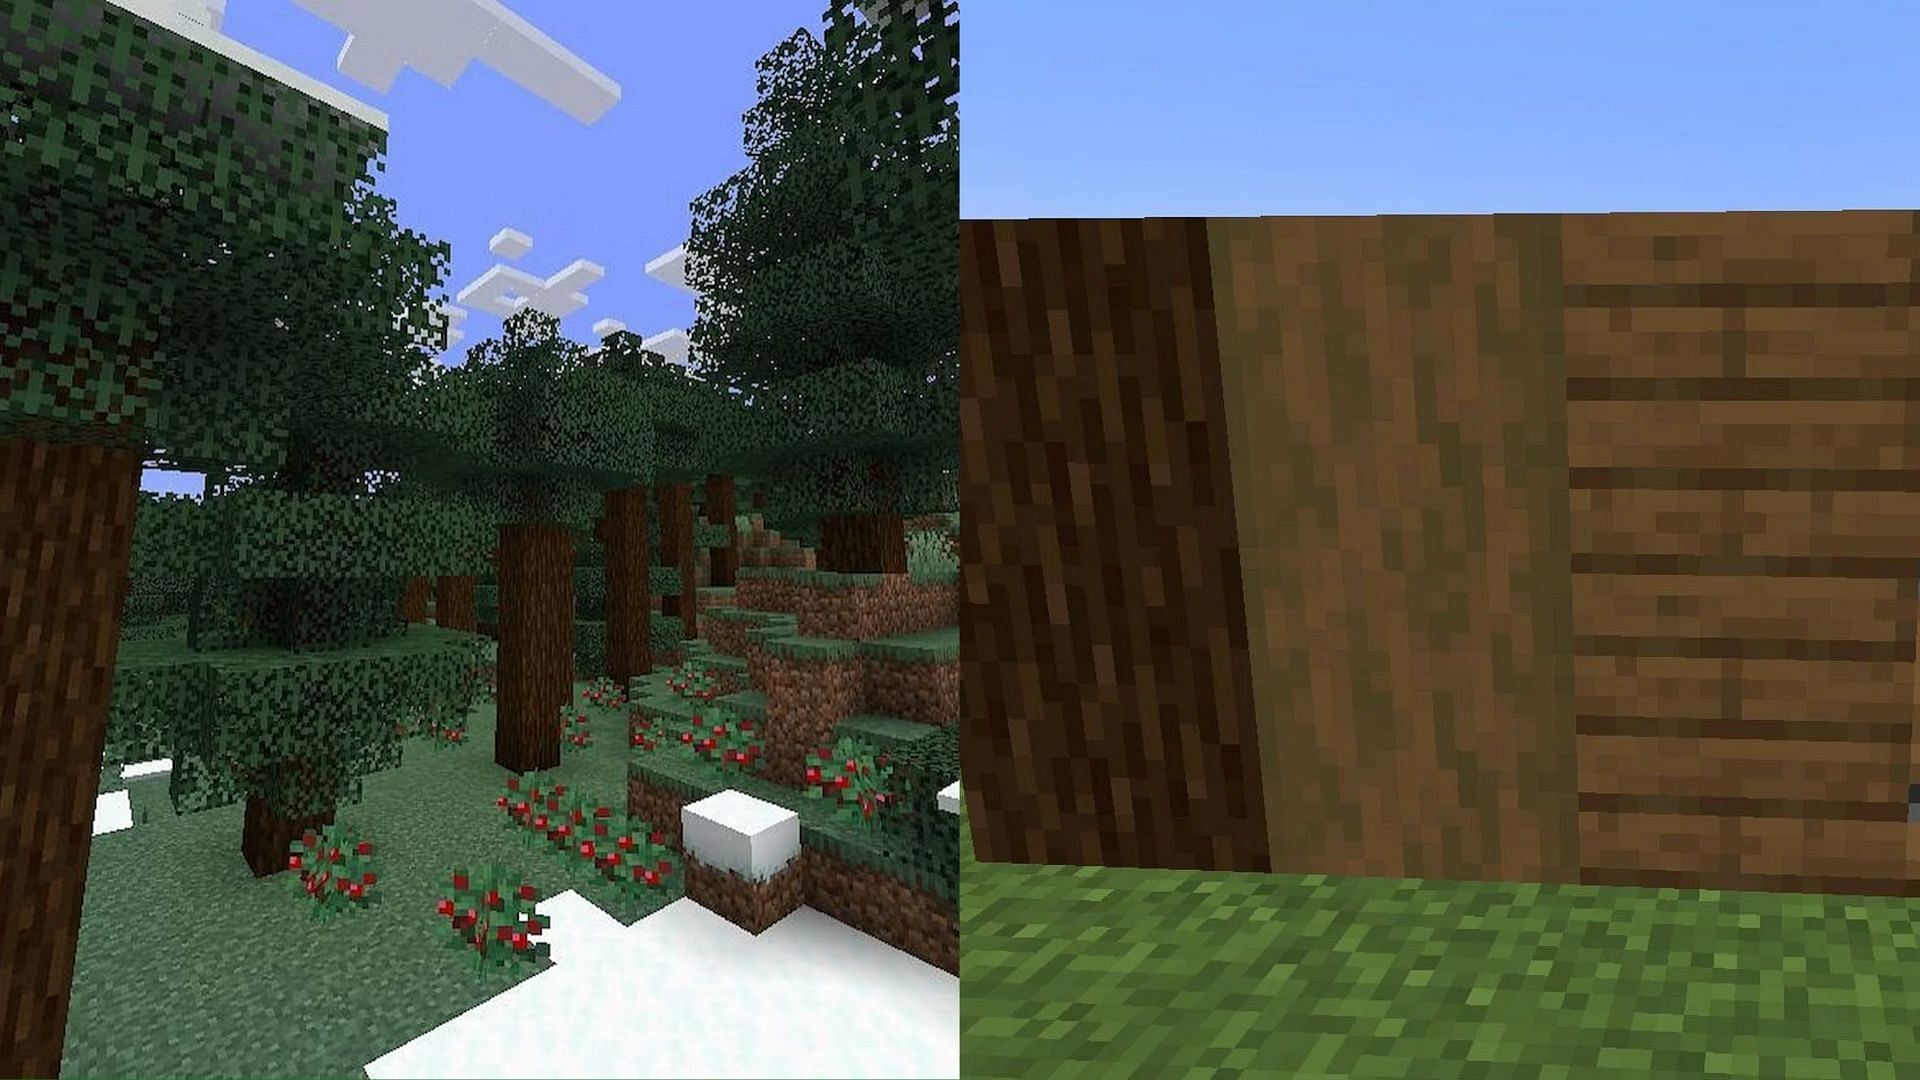 The spruce wood in Minecraft